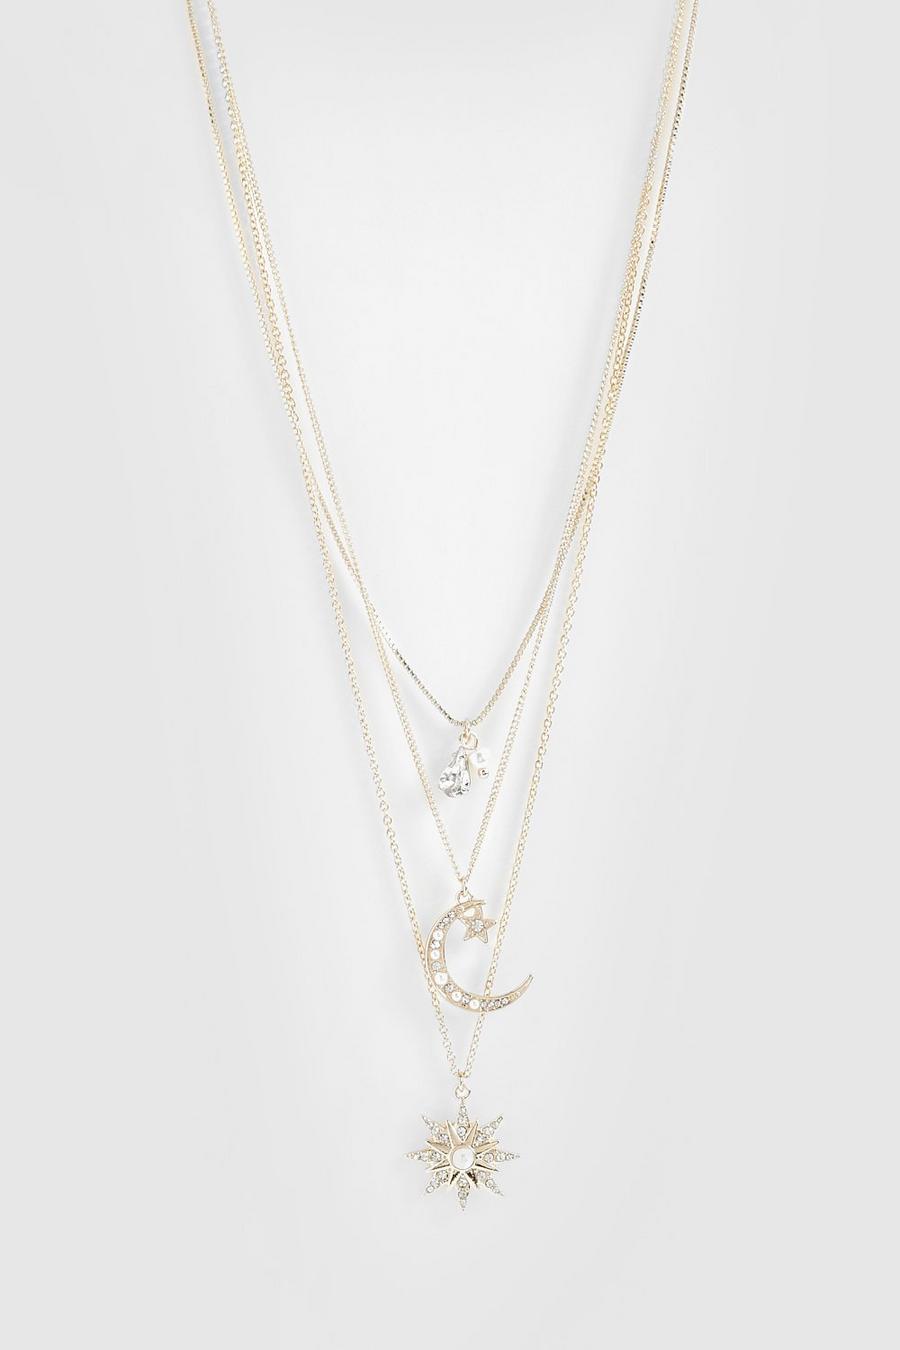 Gold Celestial Moon & Star Embellished Layered Necklace 